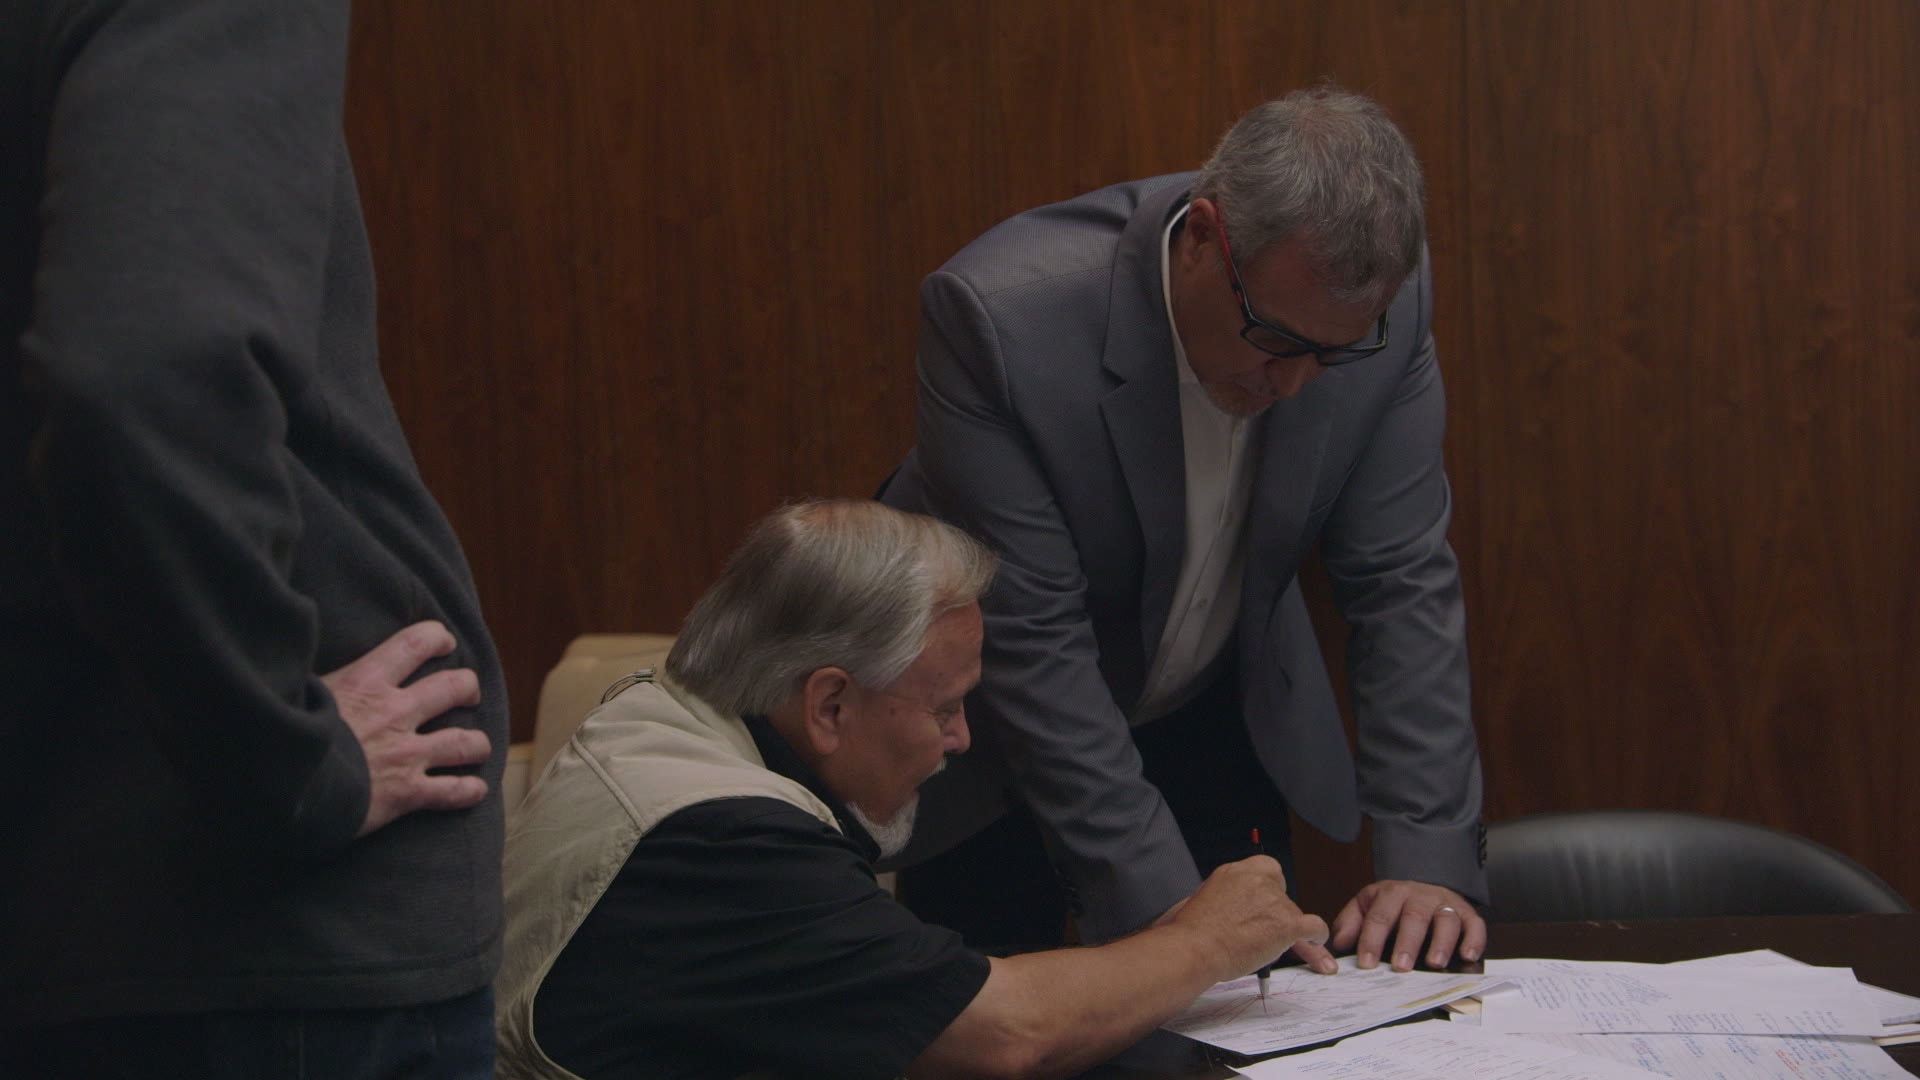 Smiley Face Killers Bonus: Bobby Chacon Looks at Evidence in Potential Smiley Face Killers Cases (Season 1, Episode 4)